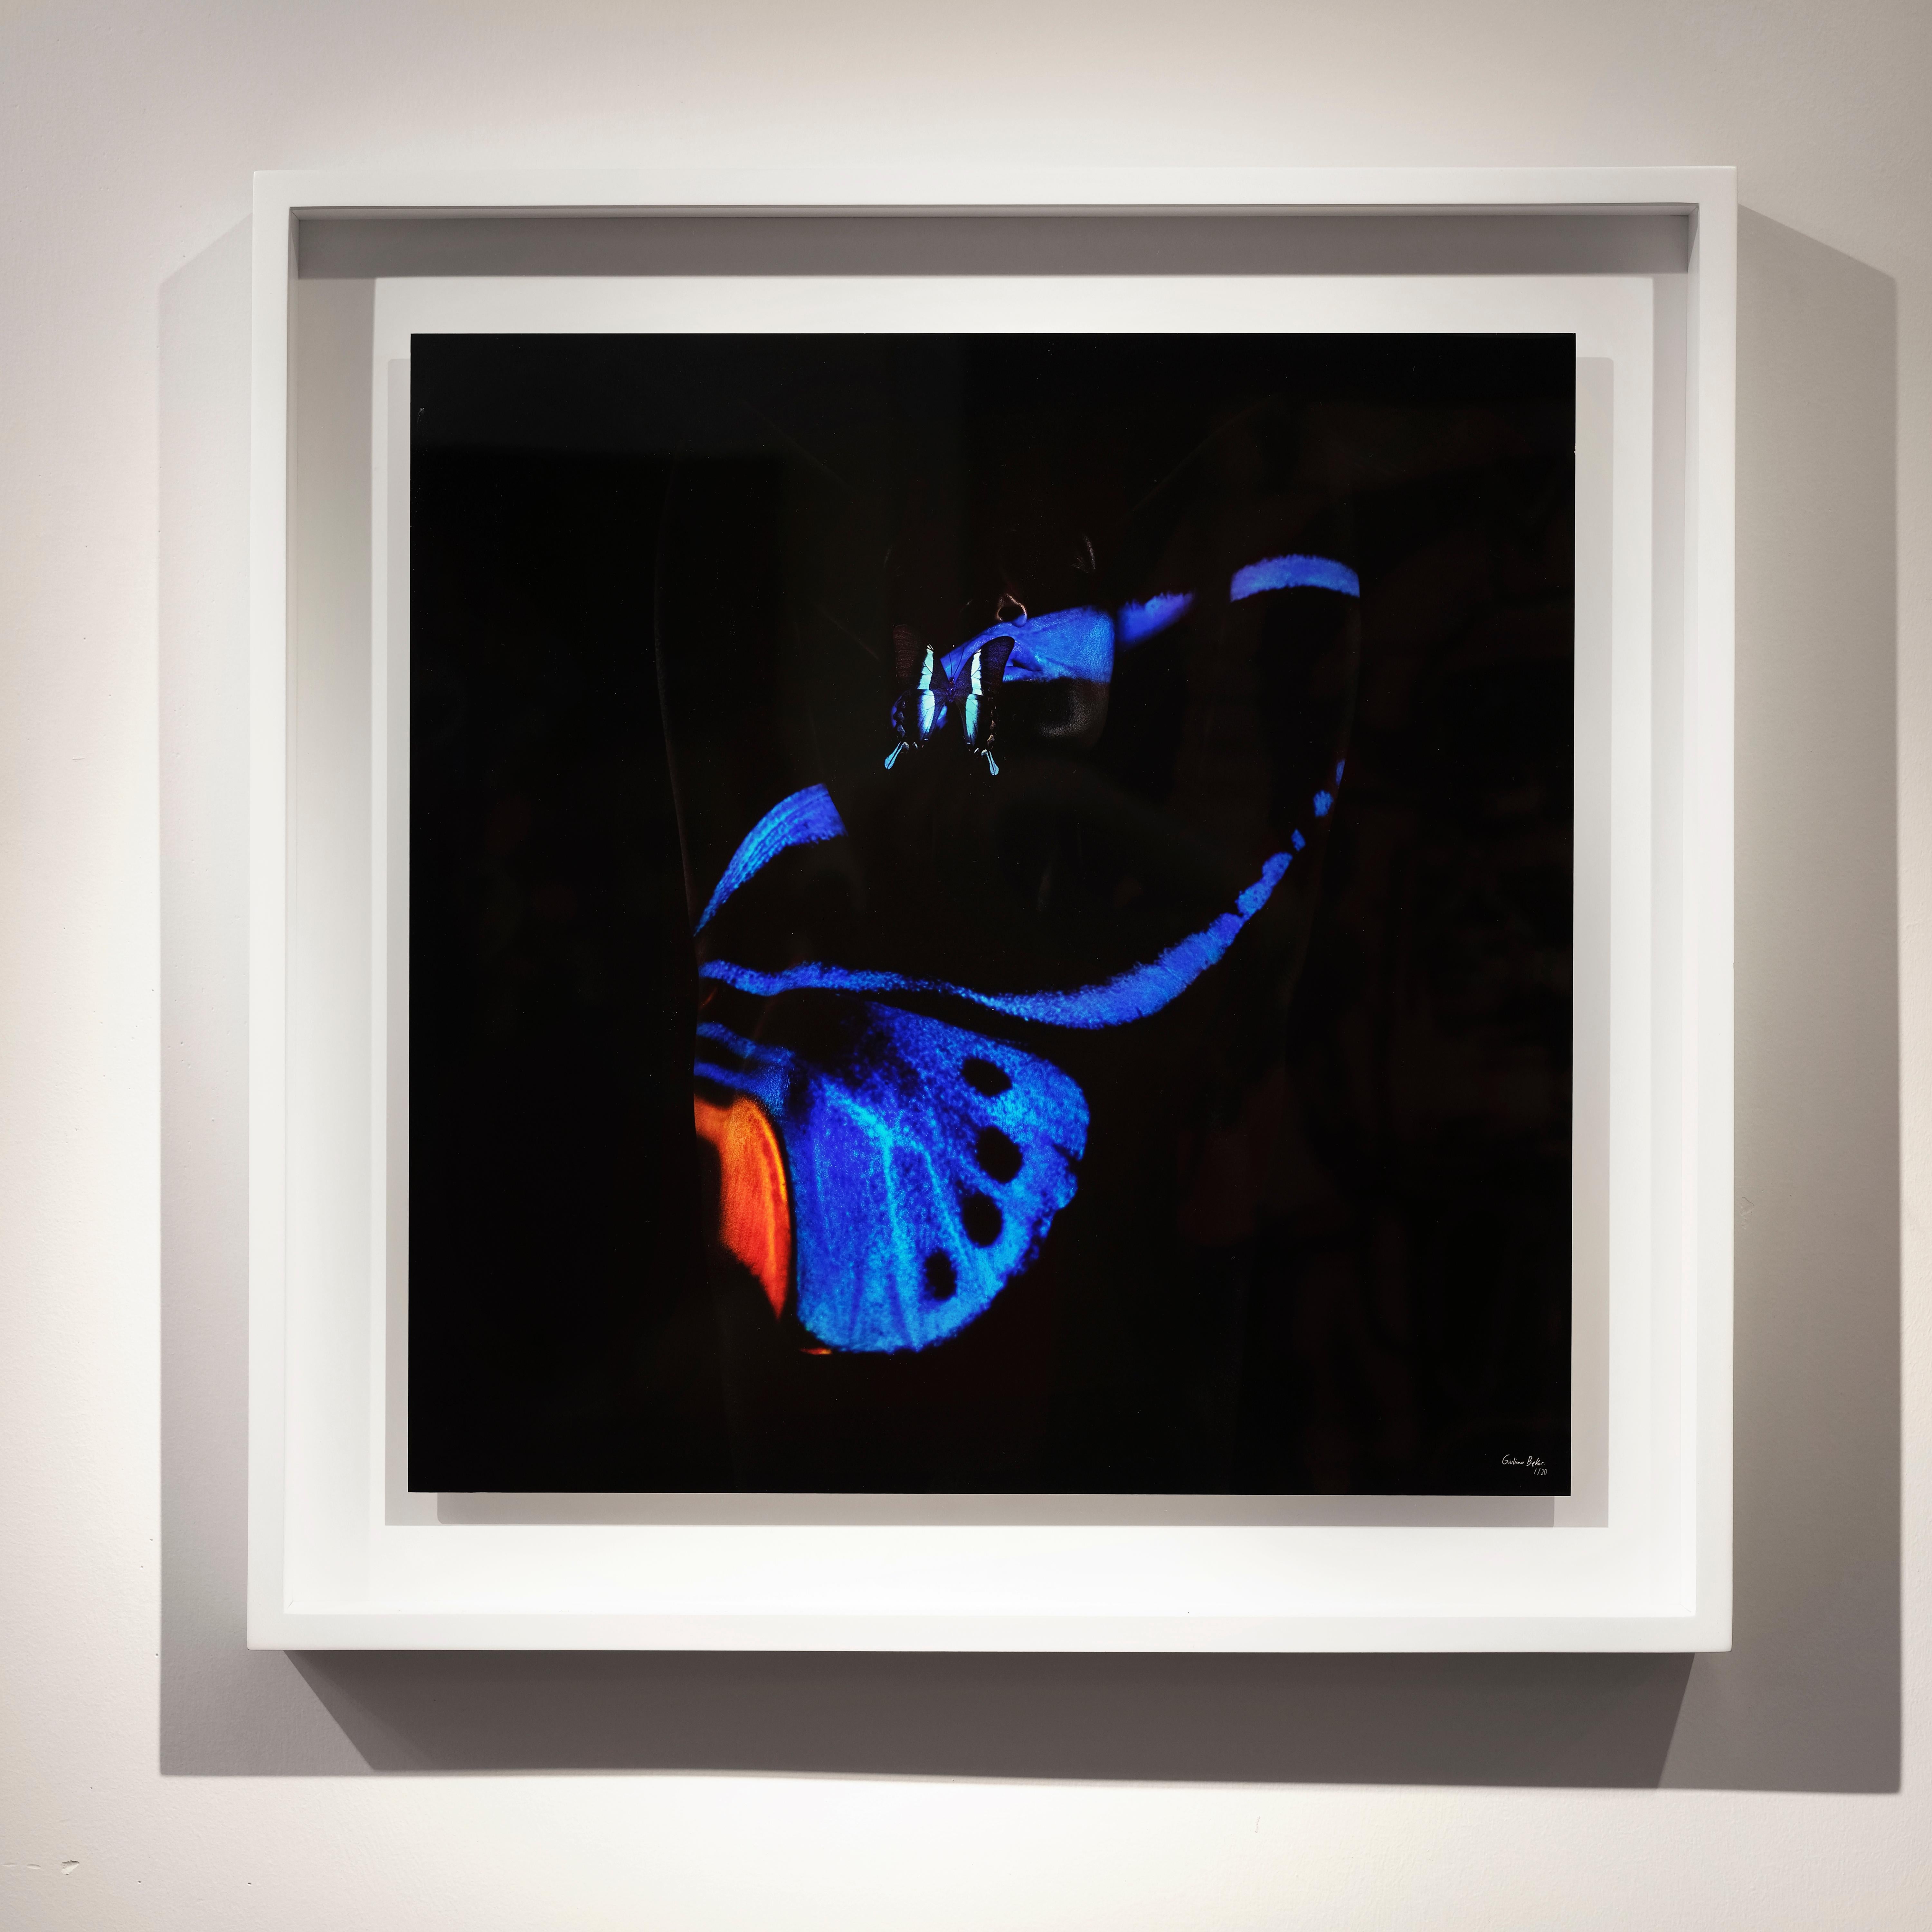 "Butterfly 7" (FRAMED) Photography 16" x 16" inch Edition 1/20 by Giuliano Bekor

Title: Butterfly B7
Year: 2018
Print size: 16" x 16" Inch
Framed size: 20" x 20" Inch 
Edition: 1/20
Artist proof: 2

Medium:  
Archival fine art Fujiflex print on